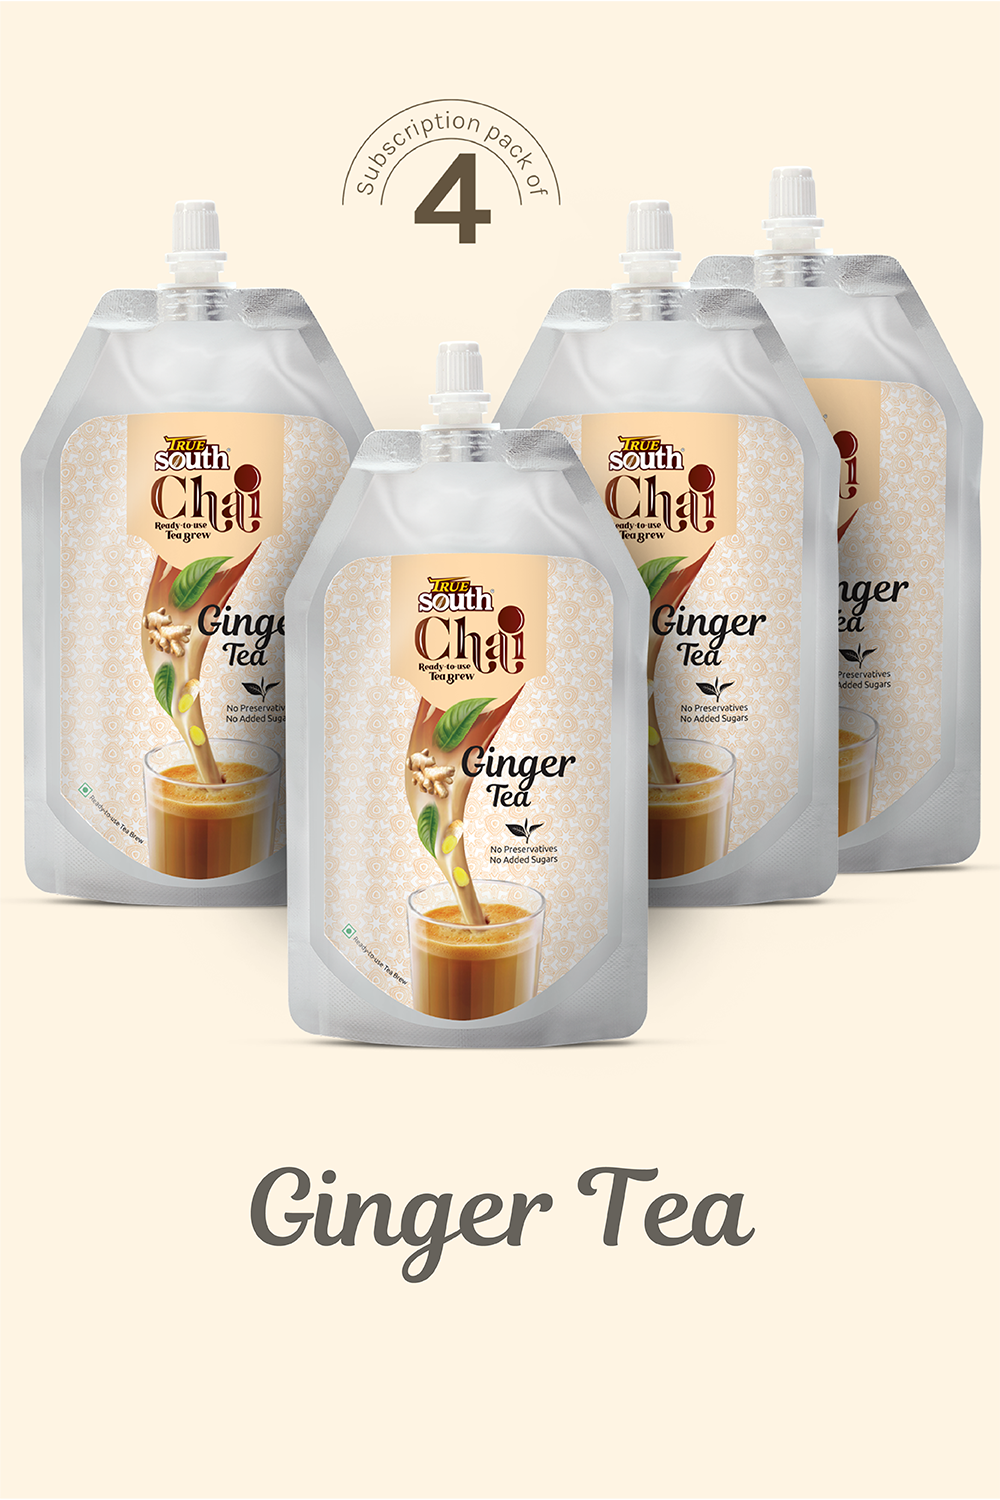 GINGER Ready-to-Use Tea Brew Subscription